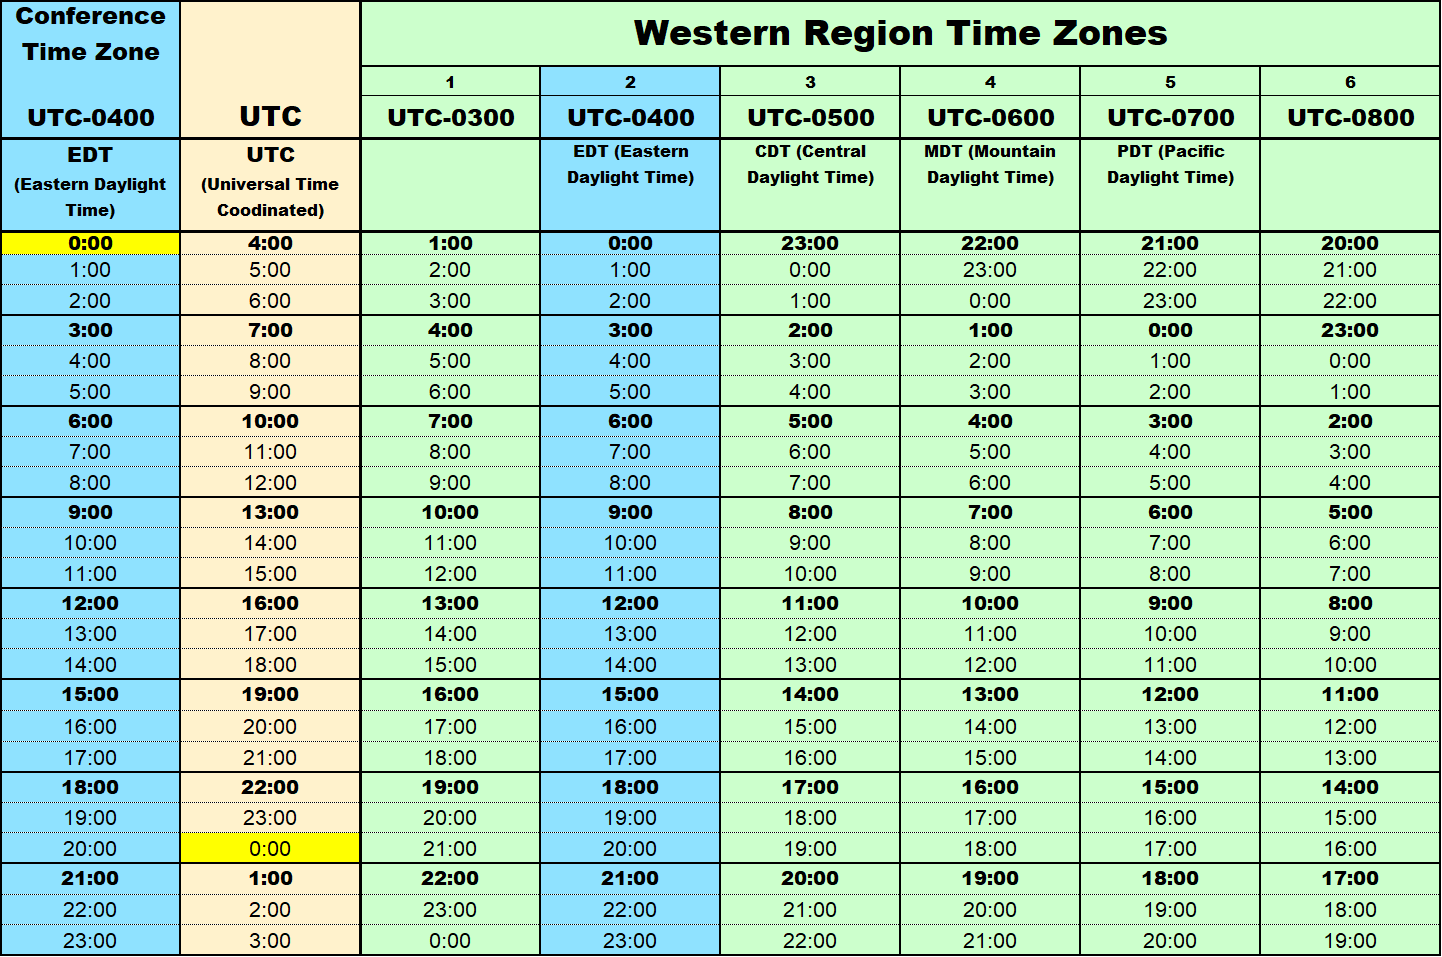 Conference Time Zones - Western Region